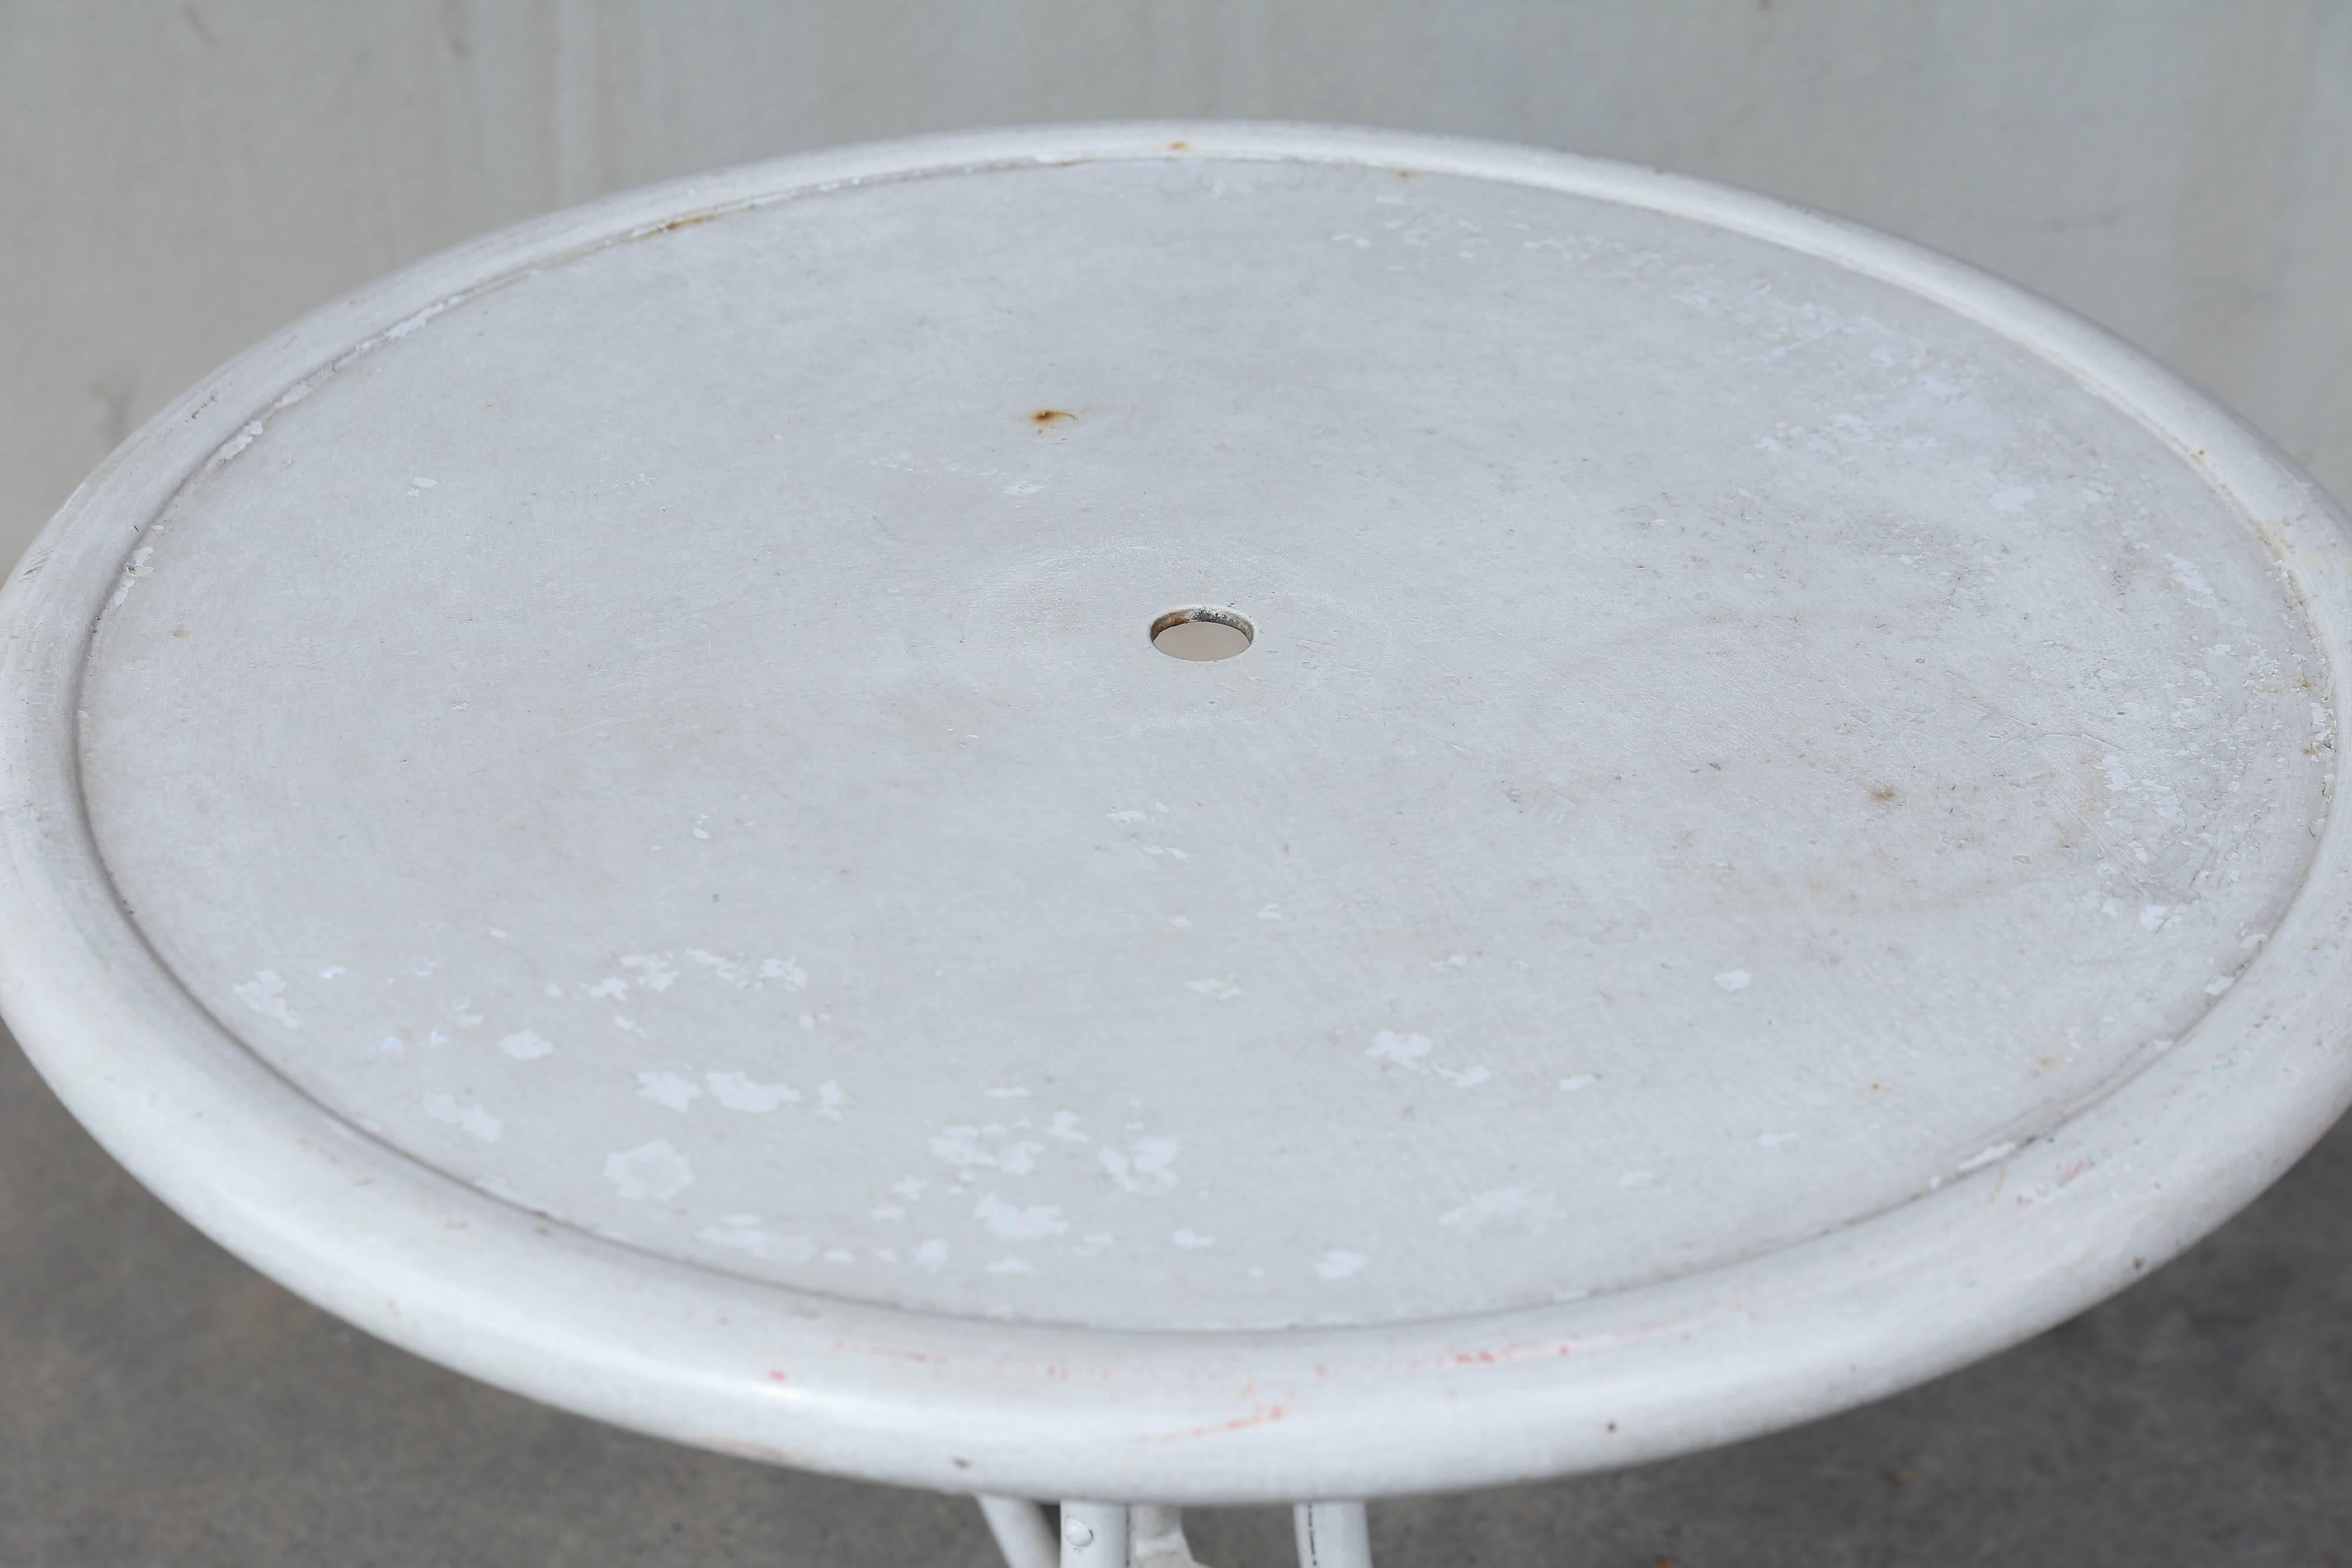 This is an early 20th century metal outdoor bistro table sourced in France. The table will accommodate an umbrella and features three curved legs. The top has a rounded edge and has been painted white. Some chips and scratches in the finish, and